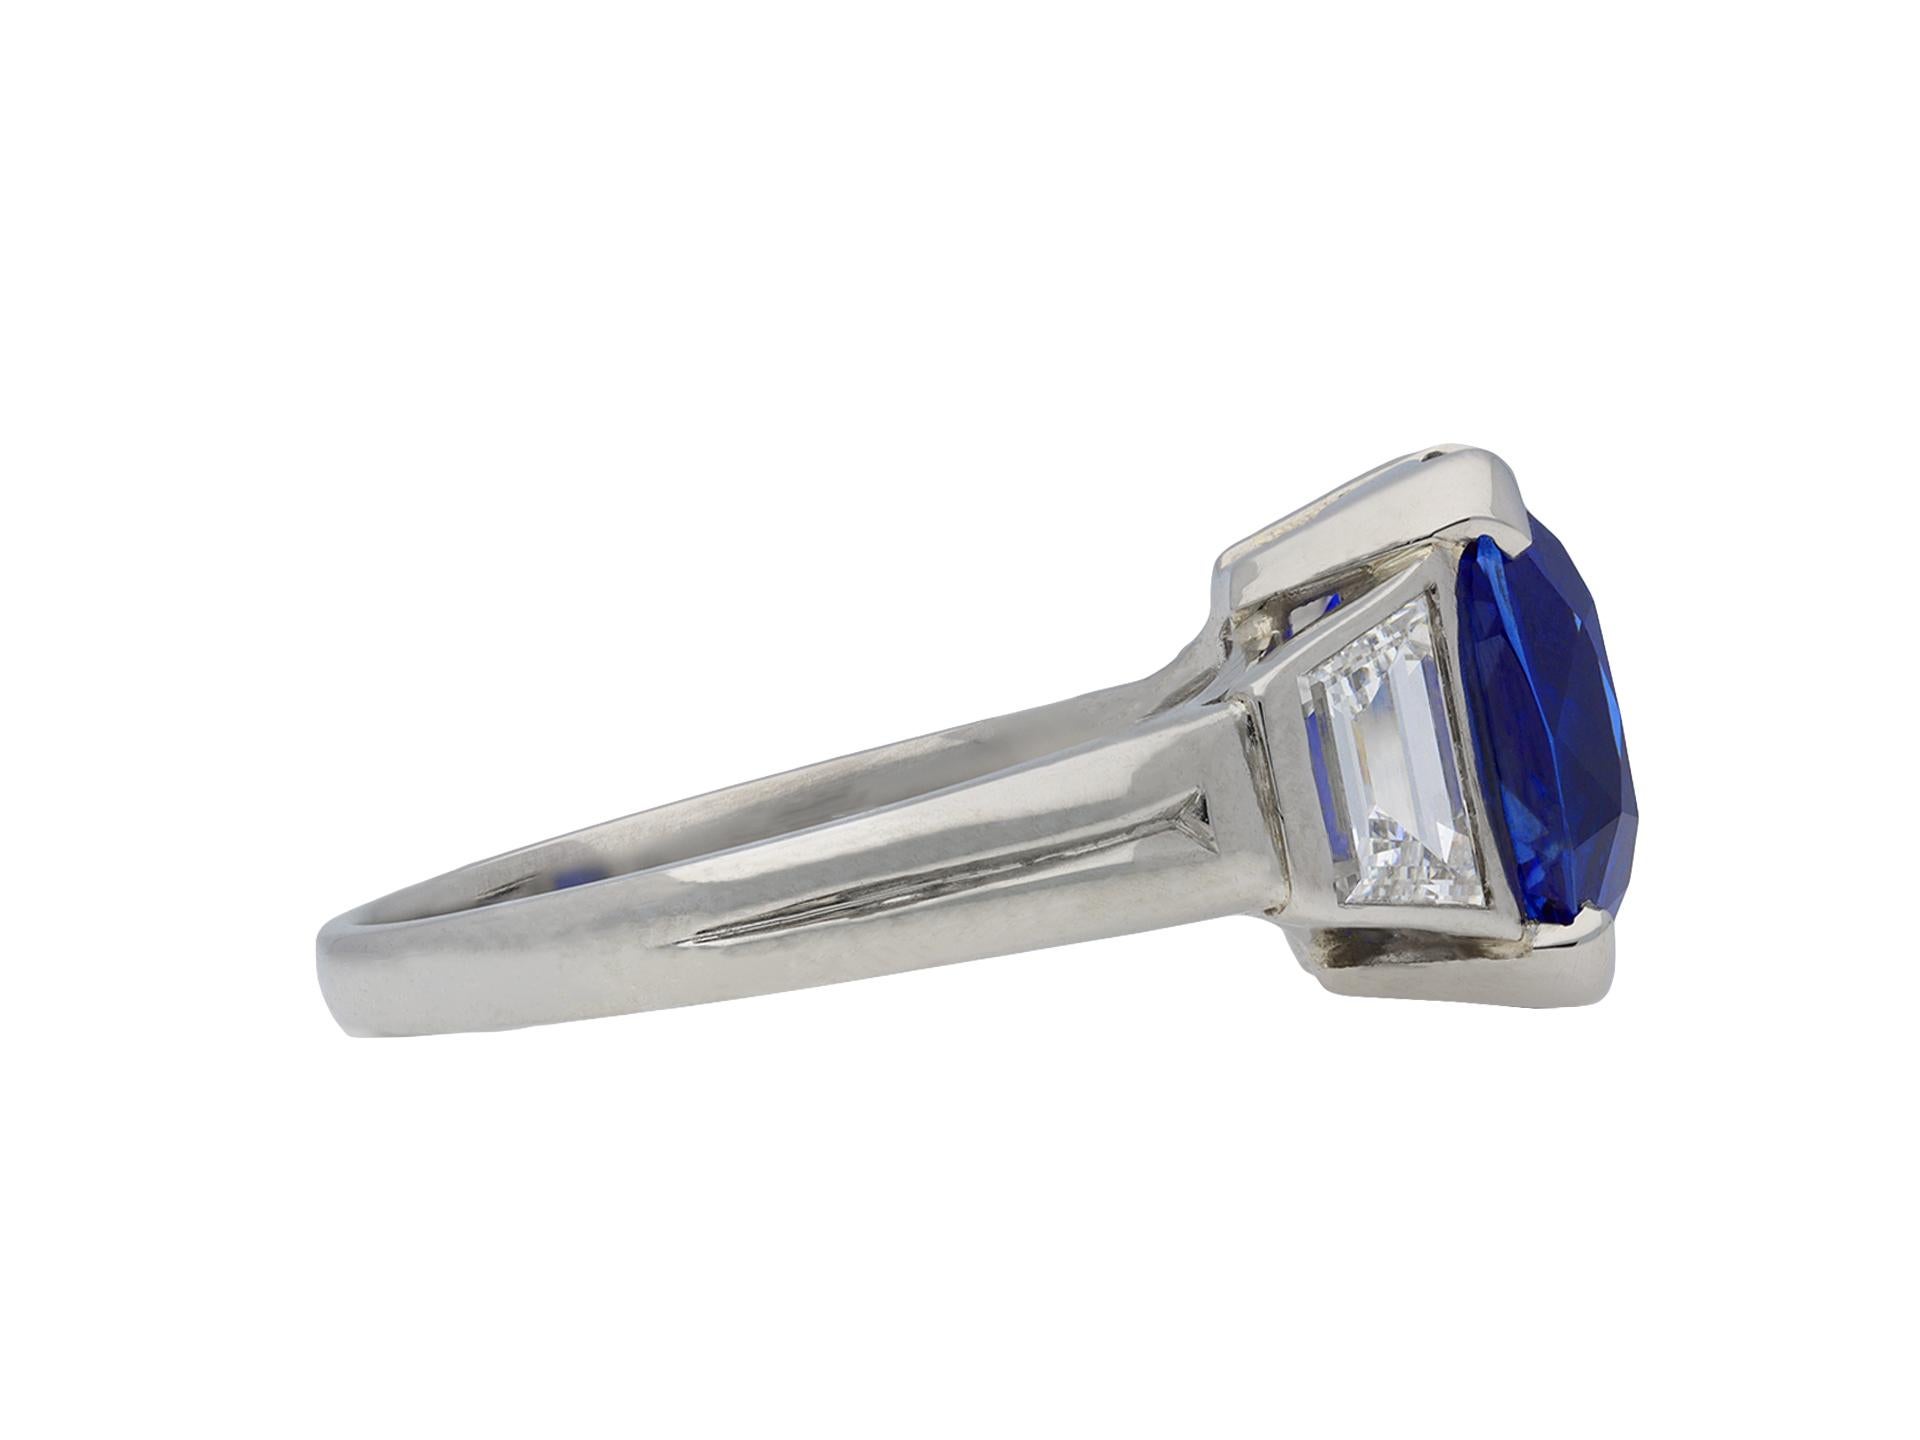 Burmese sapphire and diamond ring. Set with a cushion shape old cut natural unenhanced Burmese sapphire in an open back four claw setting with an approximate weight of 3.70 carats, flanked by two tapered baguette cut diamonds in open back rubover